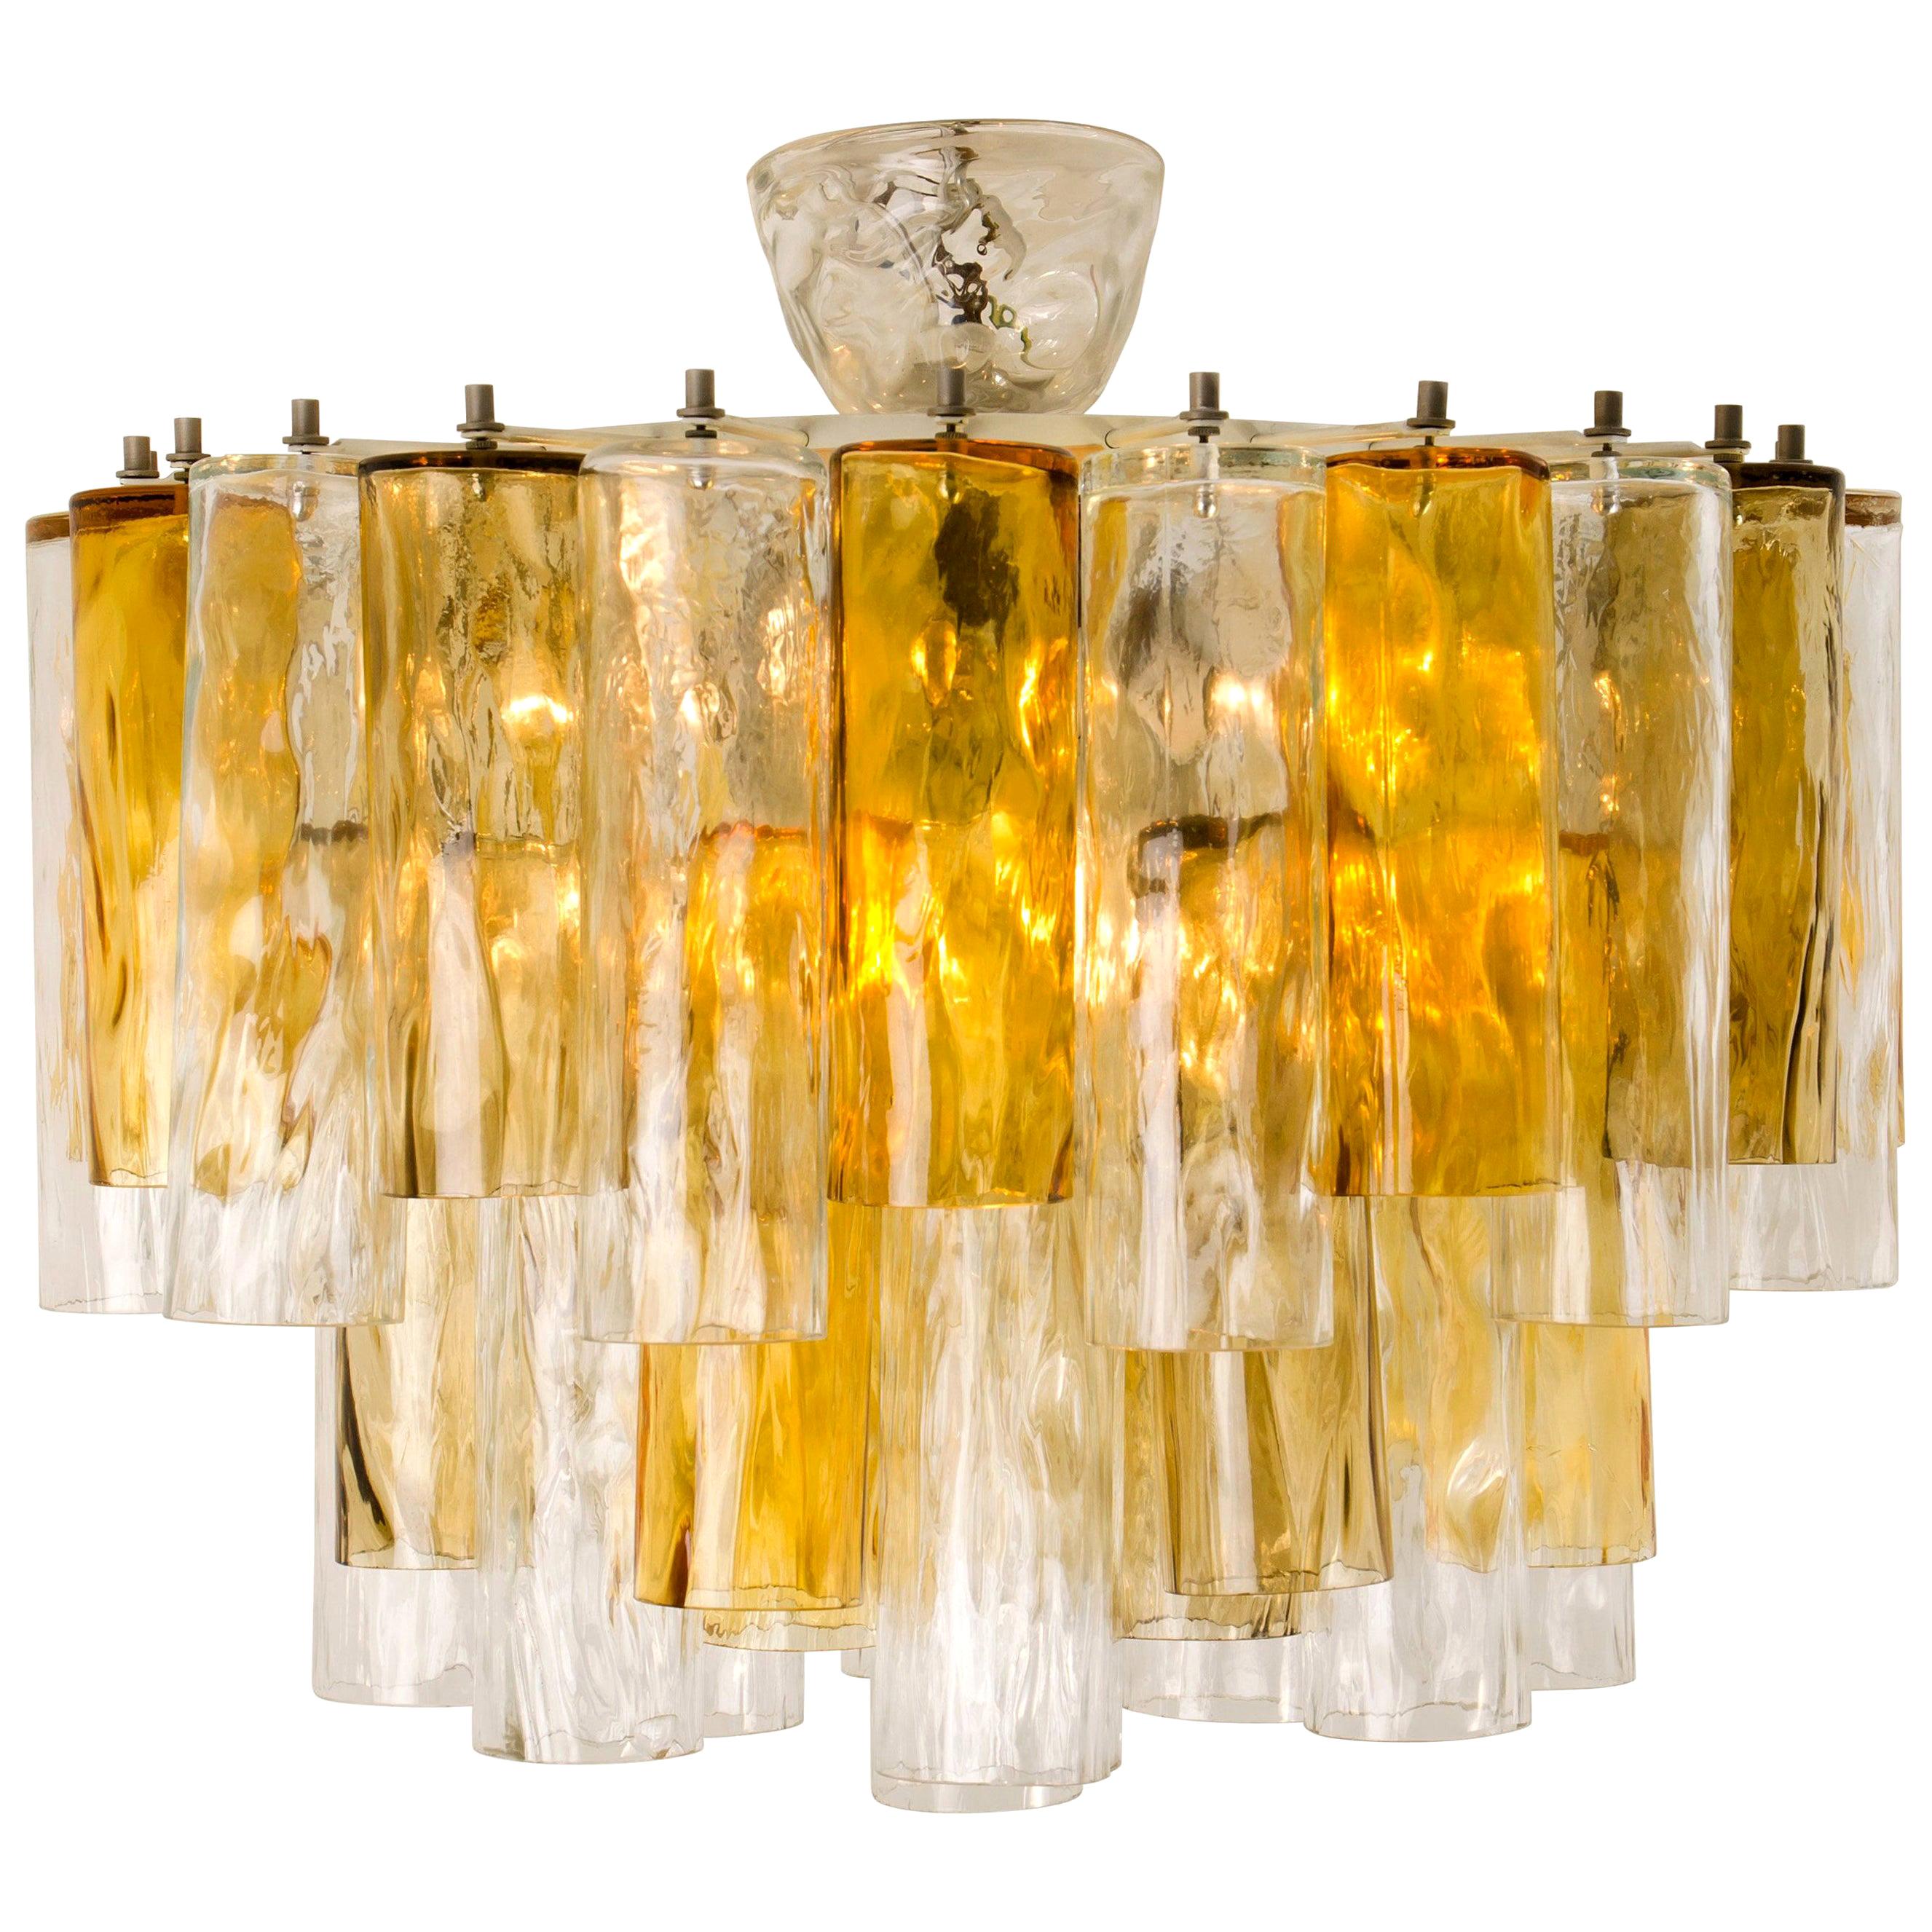 Wonderful and rare version of an extra large midcentury Barovier & Toso Murano glass chandelier. This chandelier is executed to a very high standard. The light features a metal frame with. Stunning light and darker ocher/orange and clear Murano